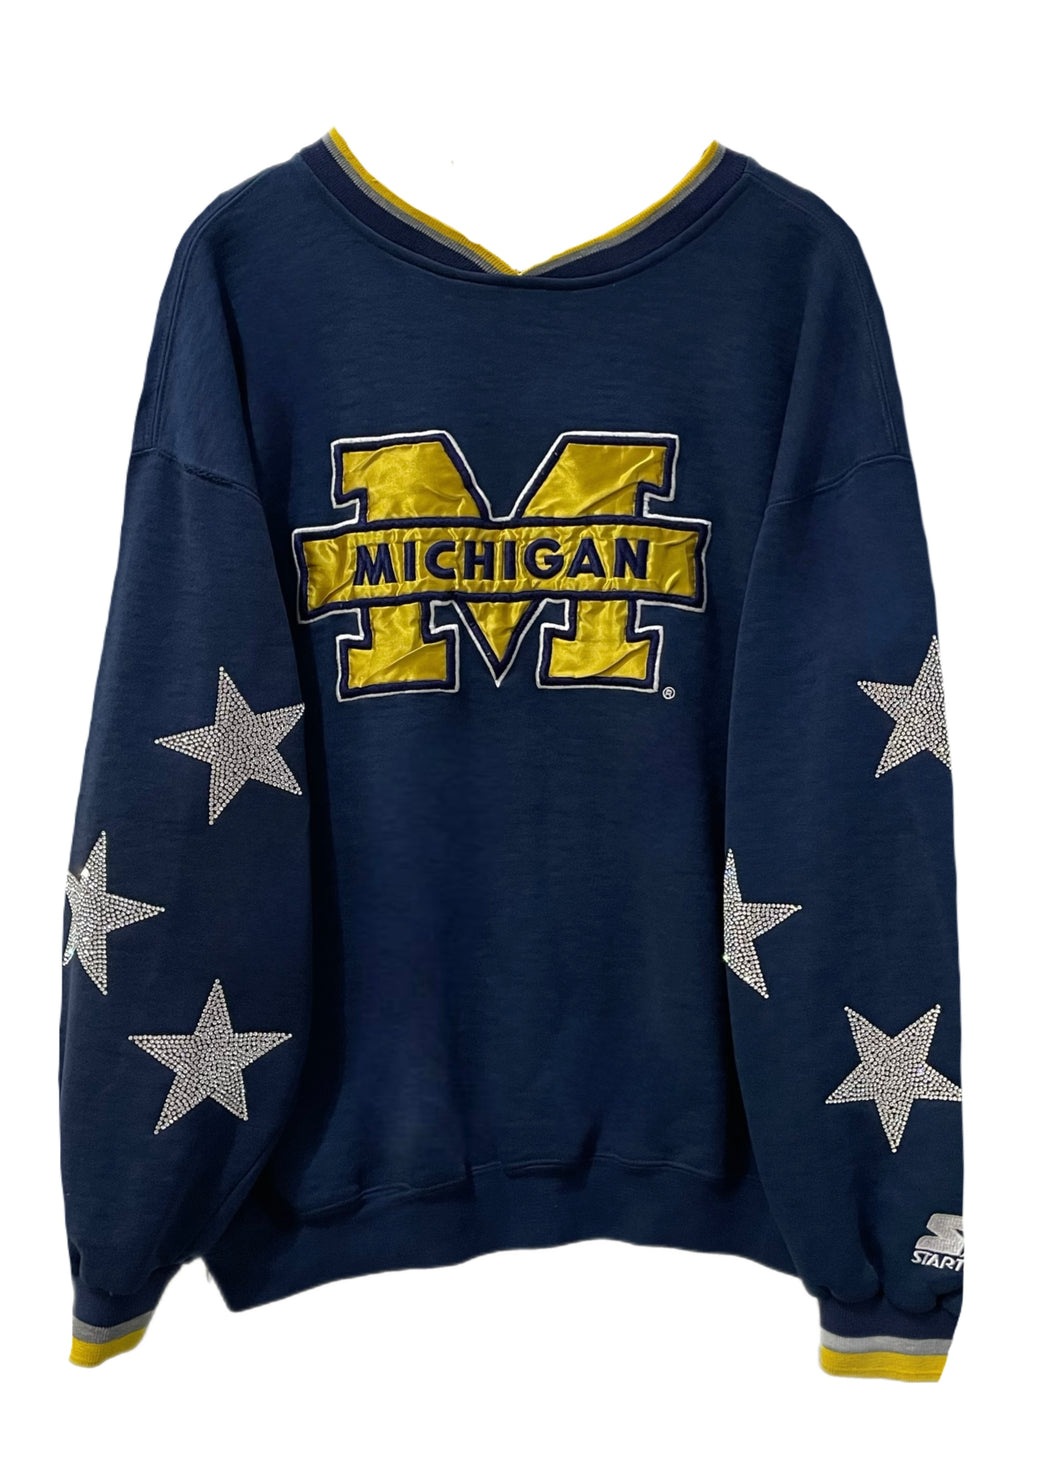 Michigan University, One of a KIND Vintage Sweatshirt with All Over Crystal Star Design